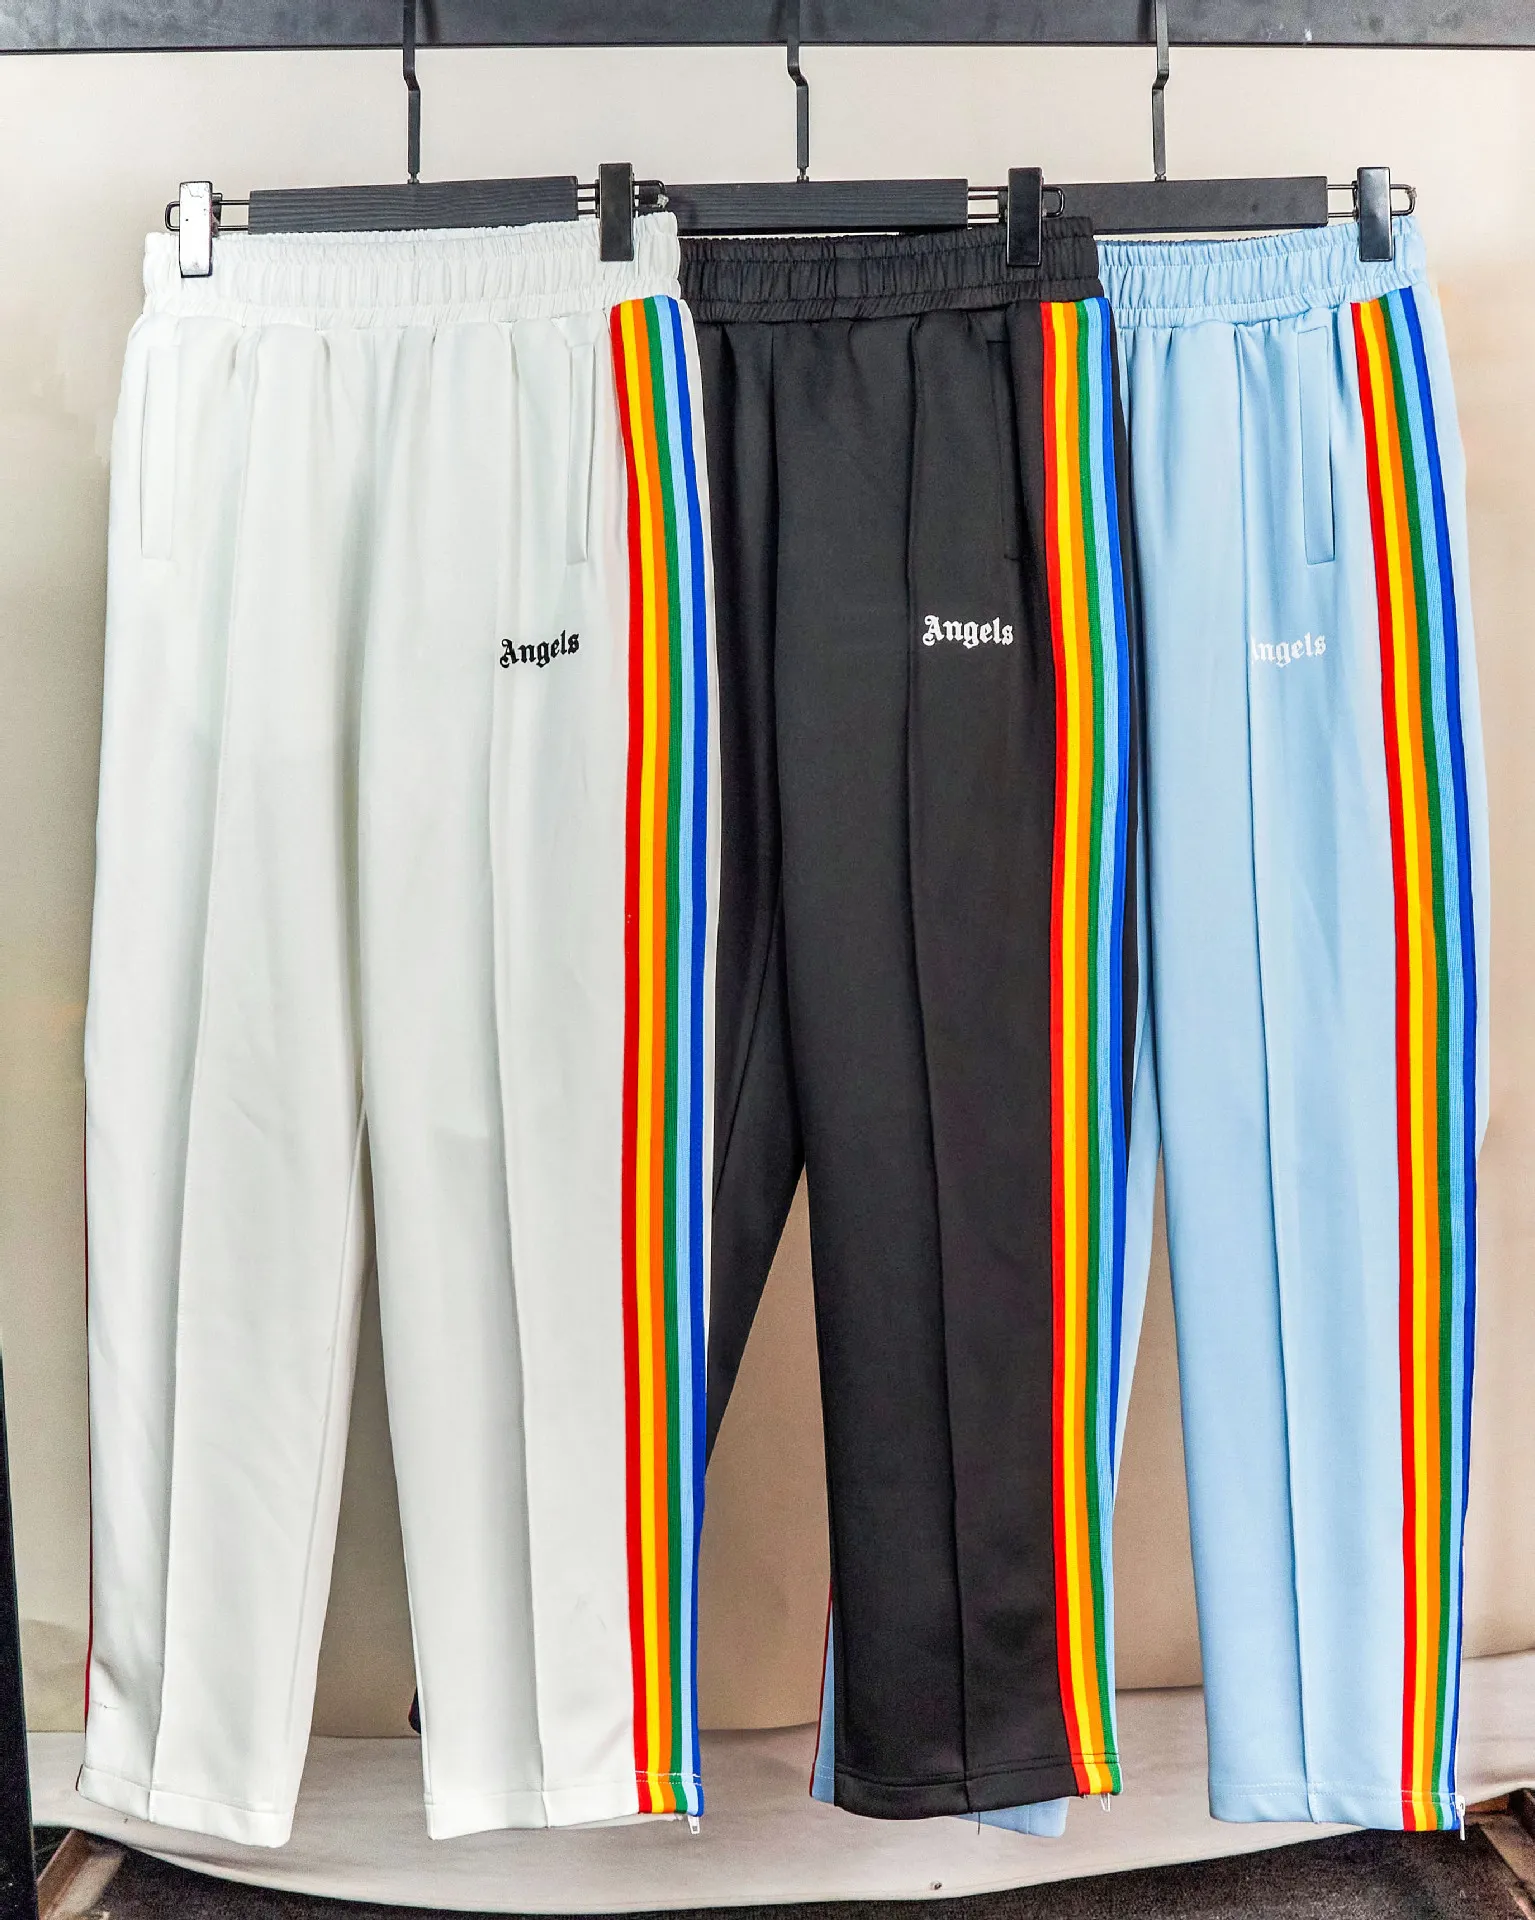 Which are the best and comfortable types of track pants? - Quora